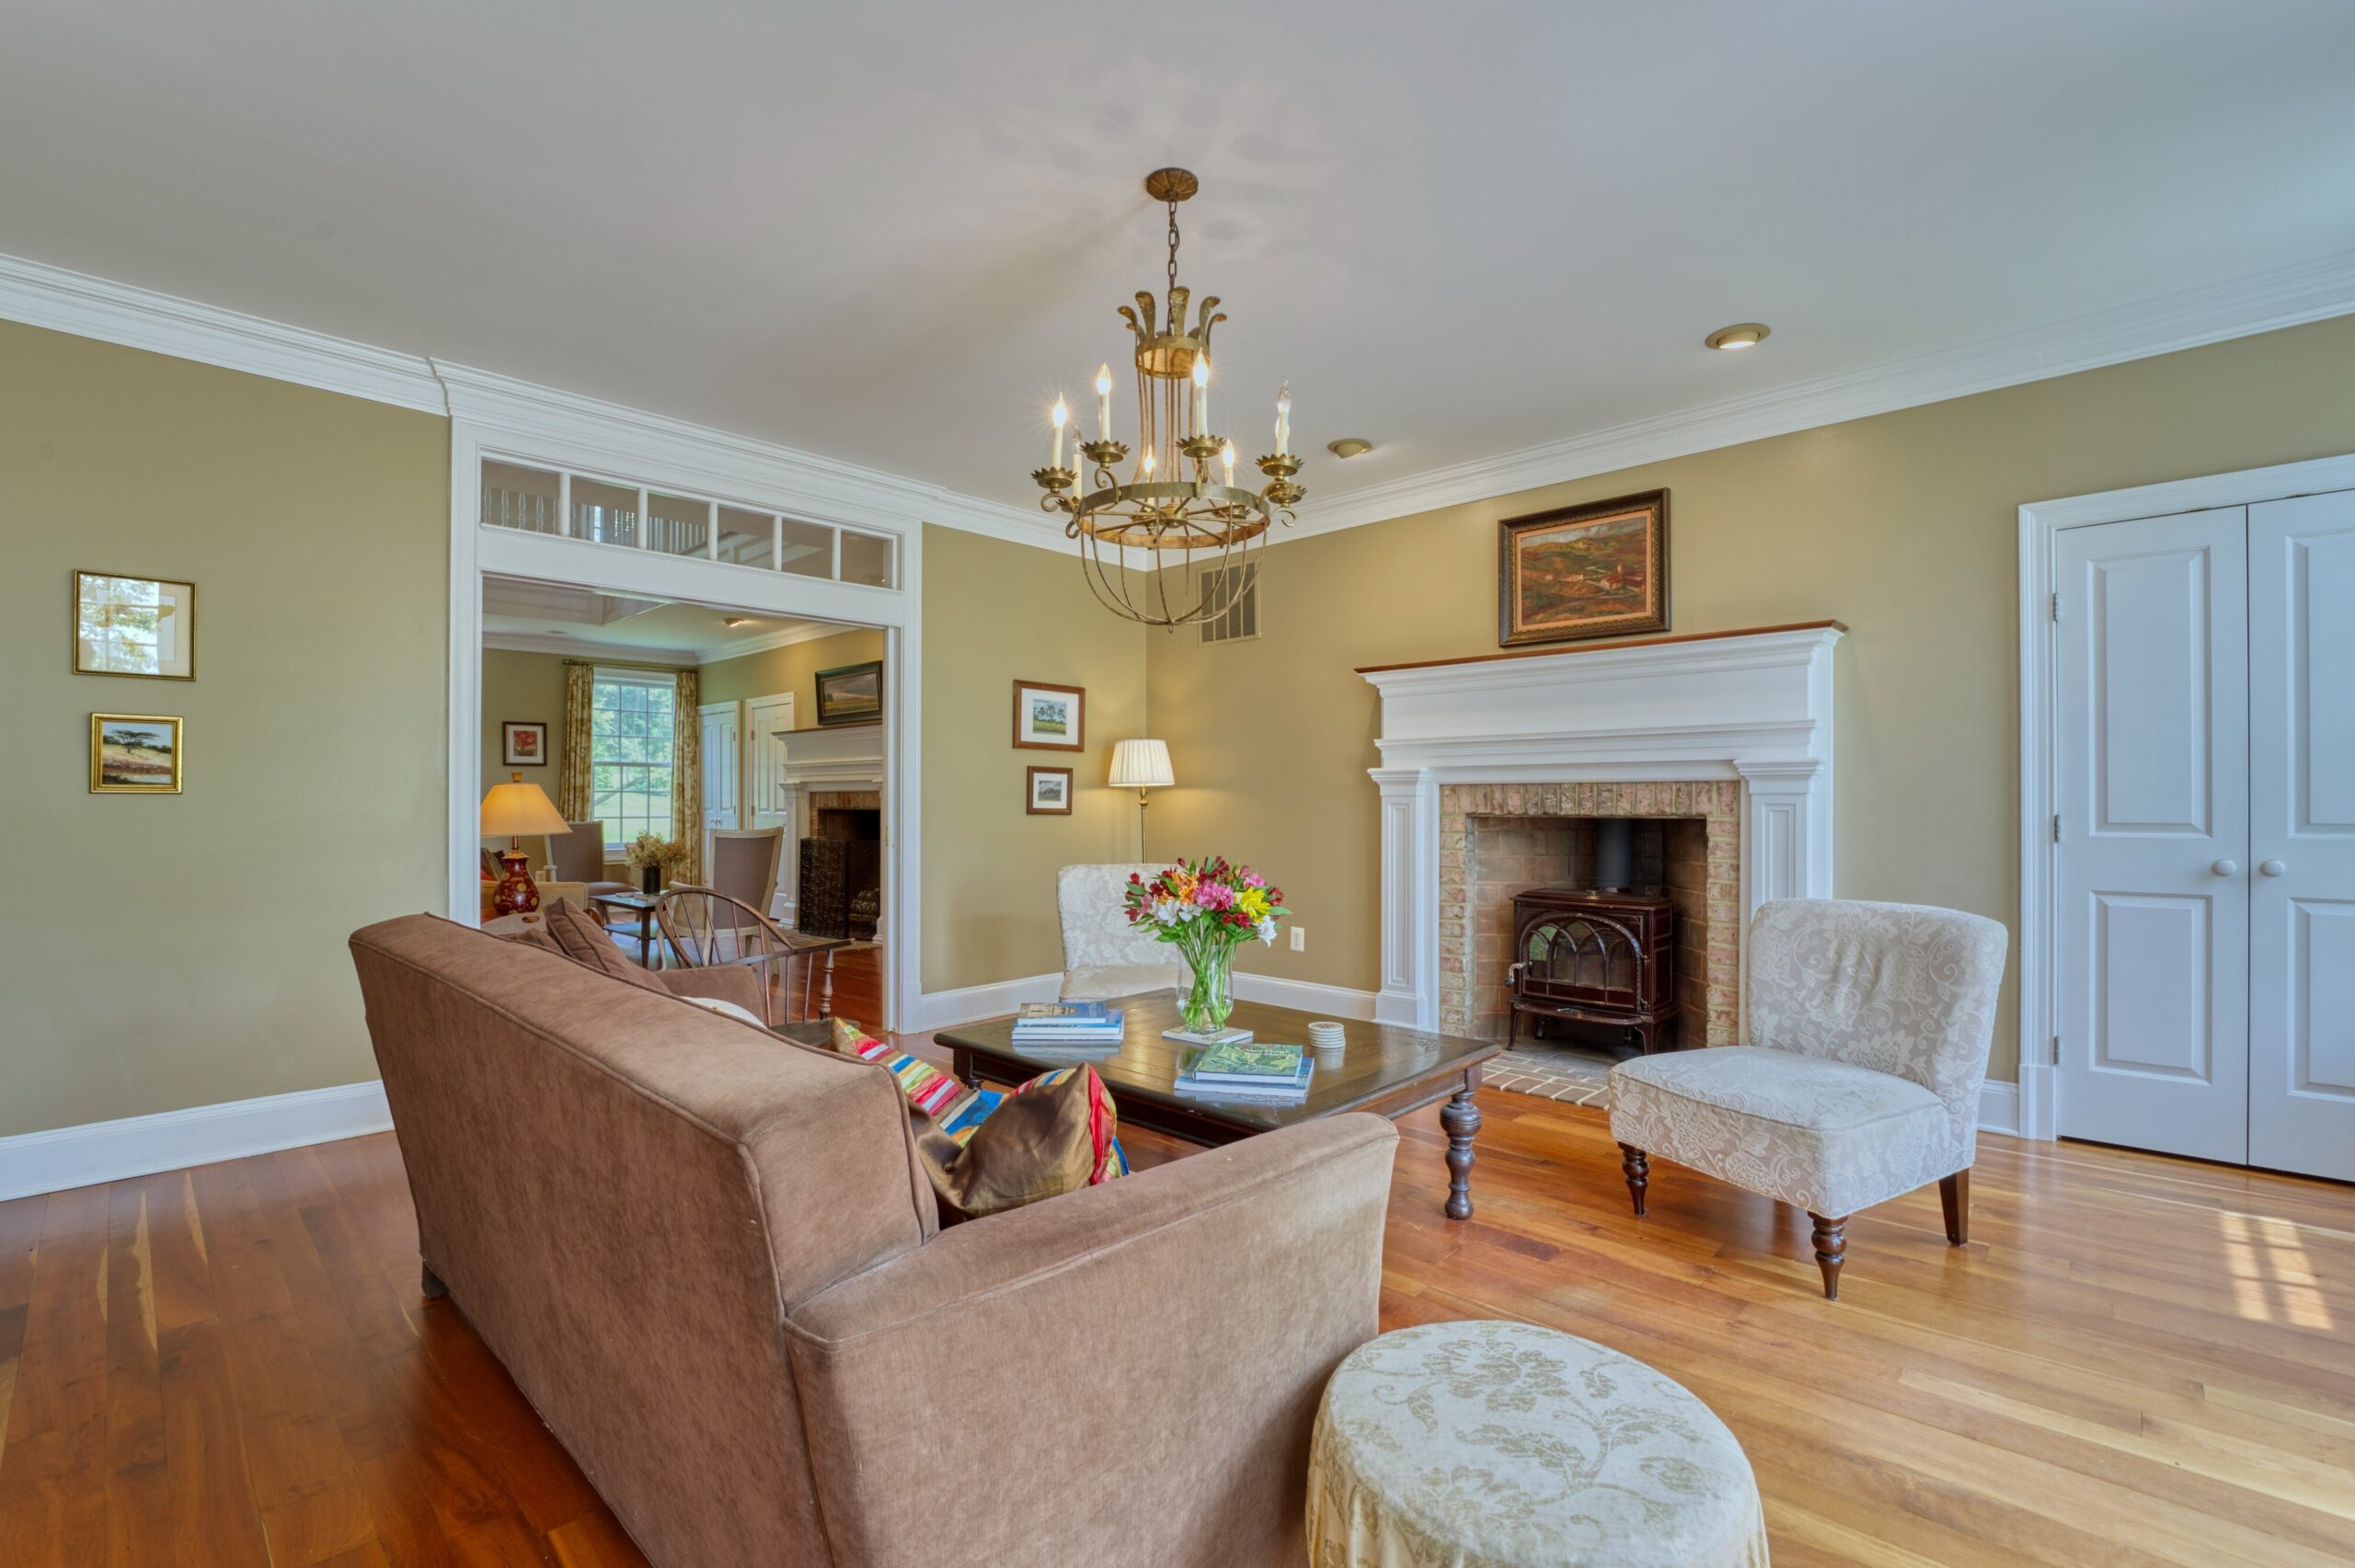 Professional interior photo of 15203 Clover Hill Road - showing a sitting room with chandelier and wood burning fireplace